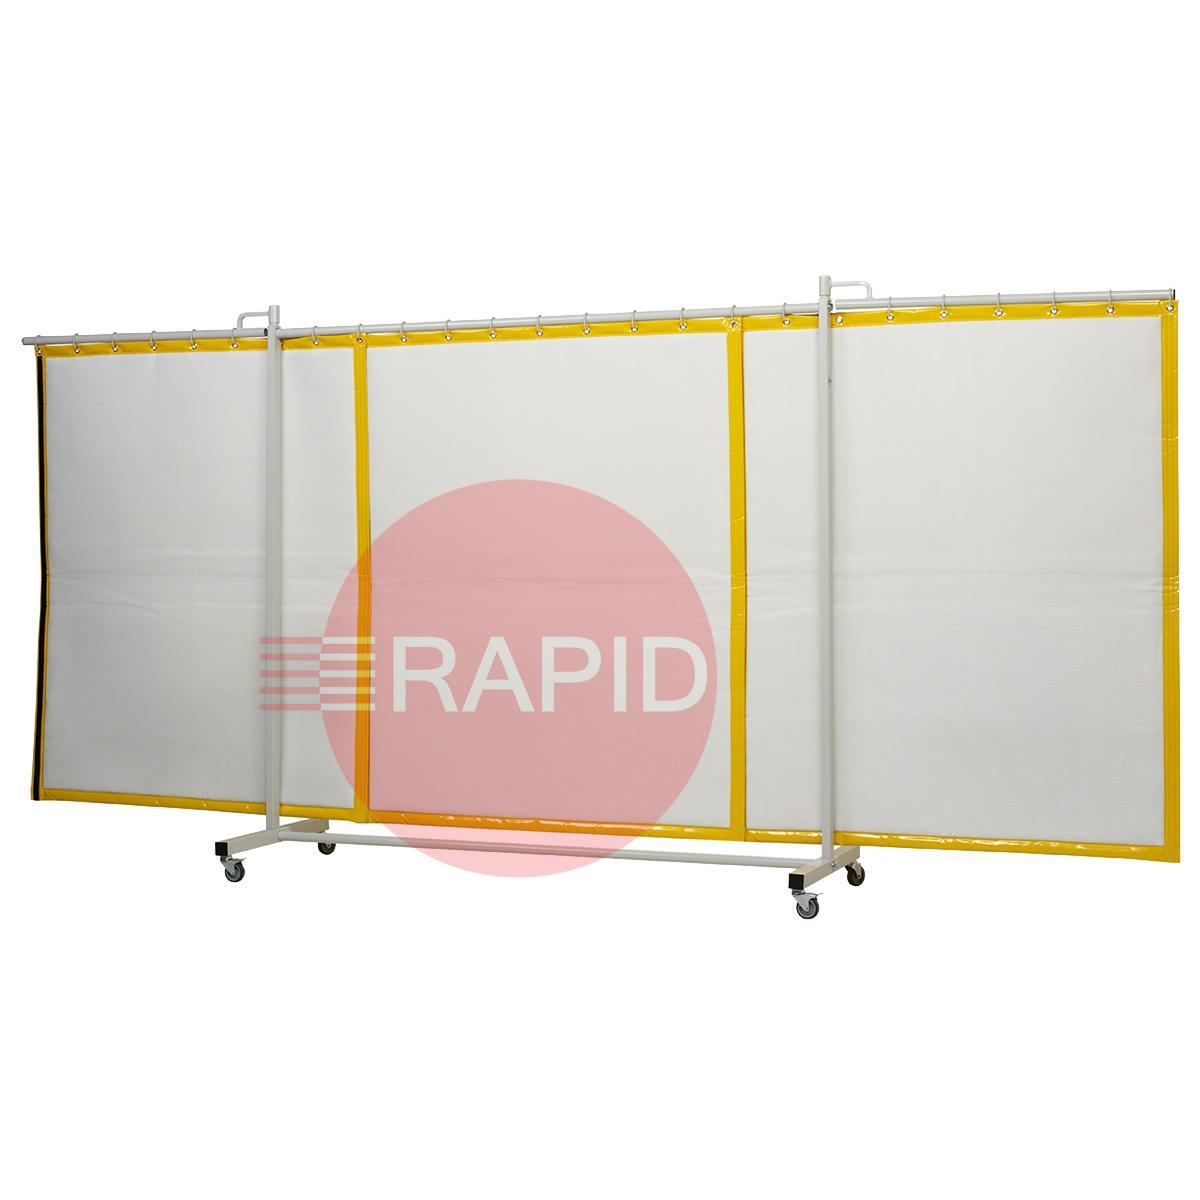 36.31.95  CEPRO Robusto XL Triptych Welding Screen with Sonic Sound Absorbing Curtain - 4.4m Wide x 2.1m High, RW=14 dB